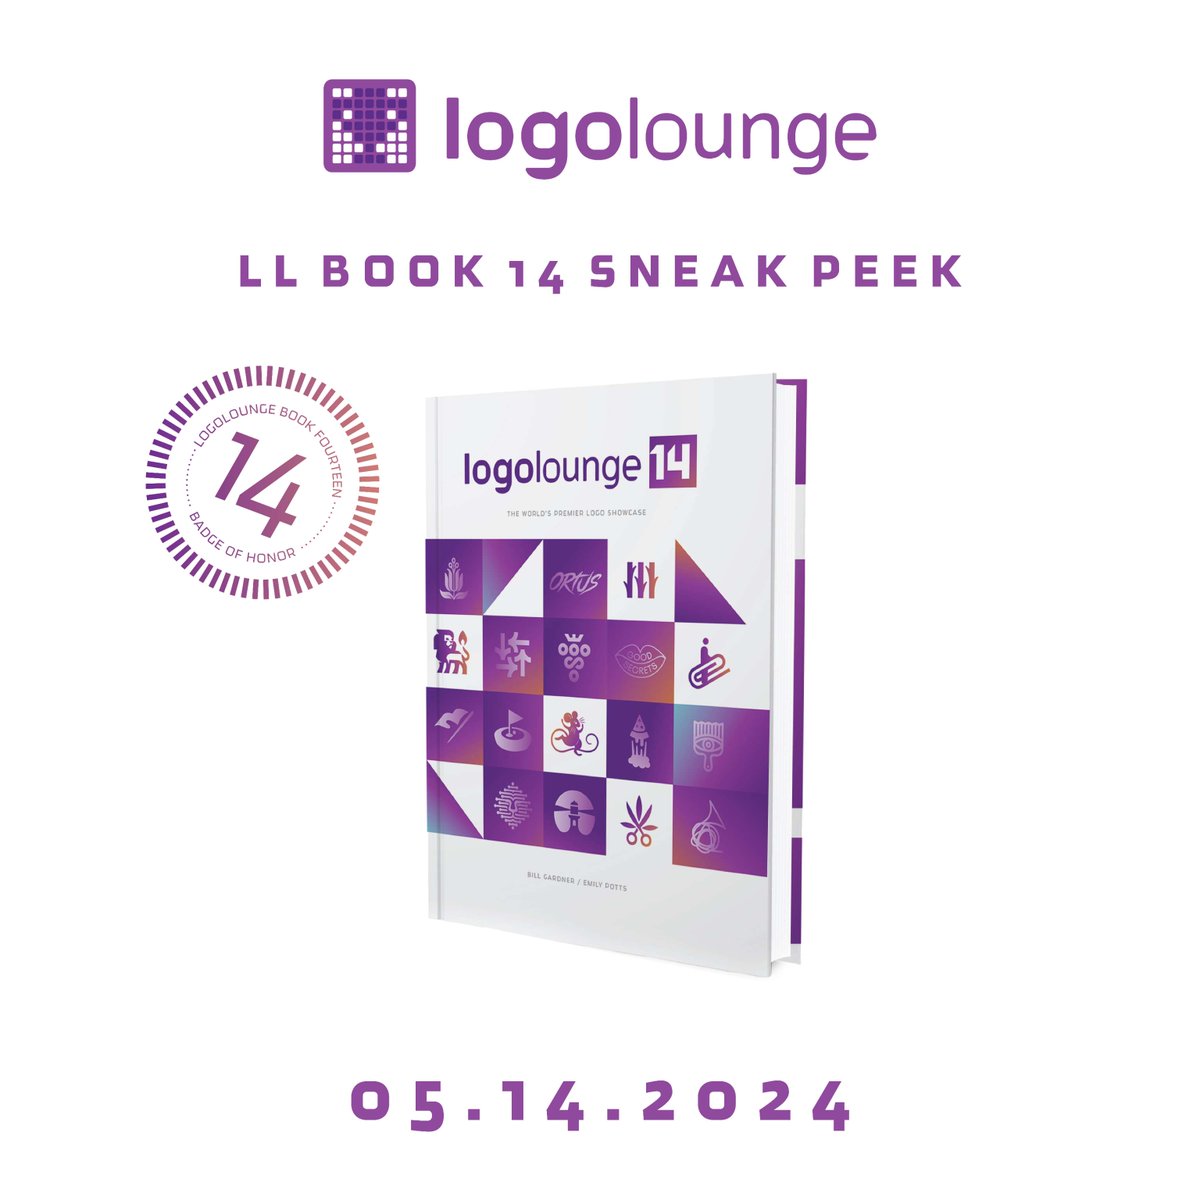 Here’s a little peek at the cover! Spot your logo on there? 👀 Only 6 days left until Book 14 is released! 💜💜

#logolounge #logoloungebook14 #releasedate #Book14